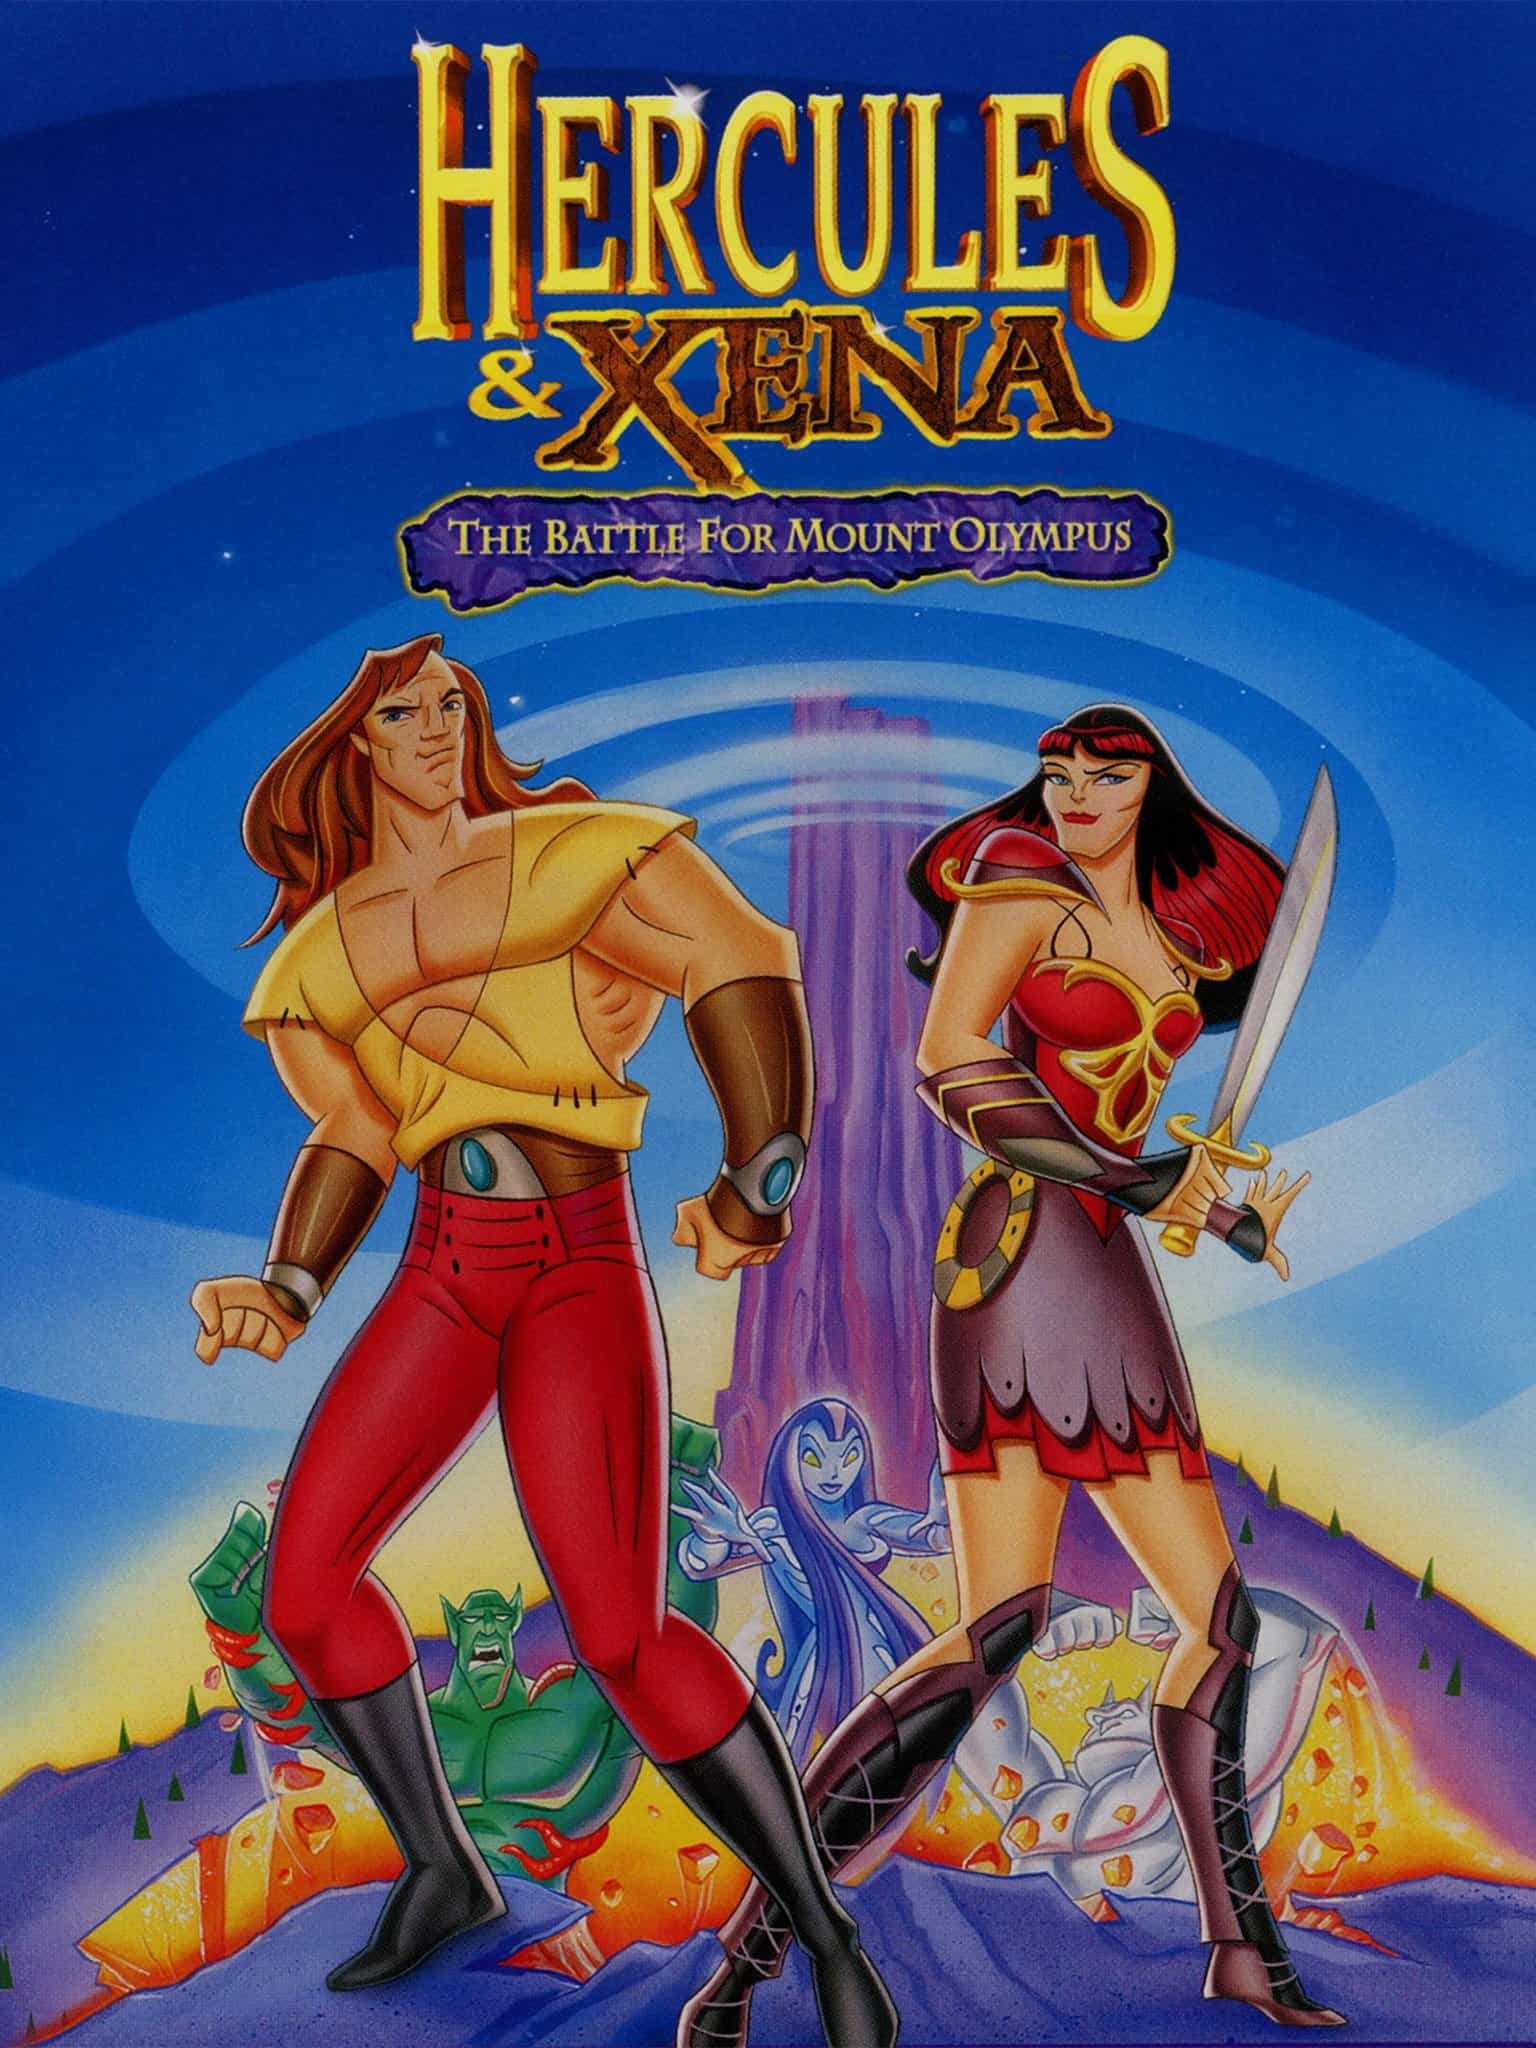 Hercules and Xena - The Animated Movie: The Battle For Mount Olympus